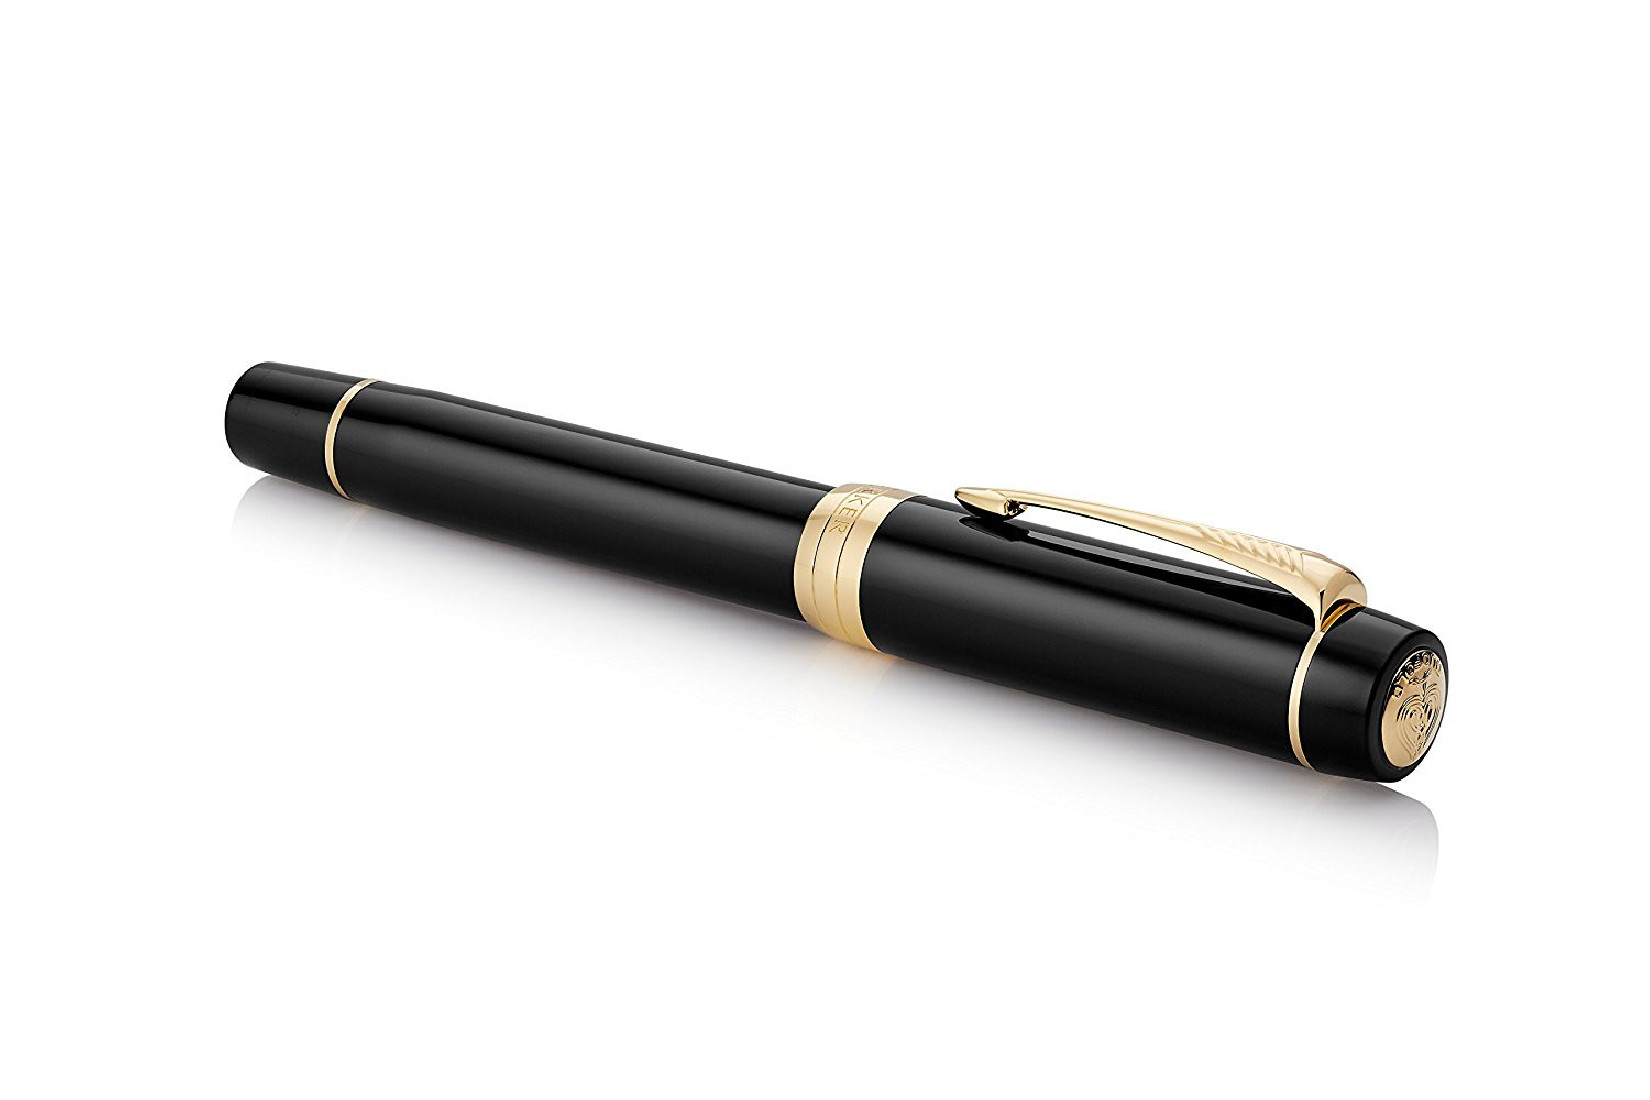 Parker Duofold Centennial Fountain Pen, Classic Black with Gold Trim, Solid Gold Nib, Black Ink and Converter (1931381)